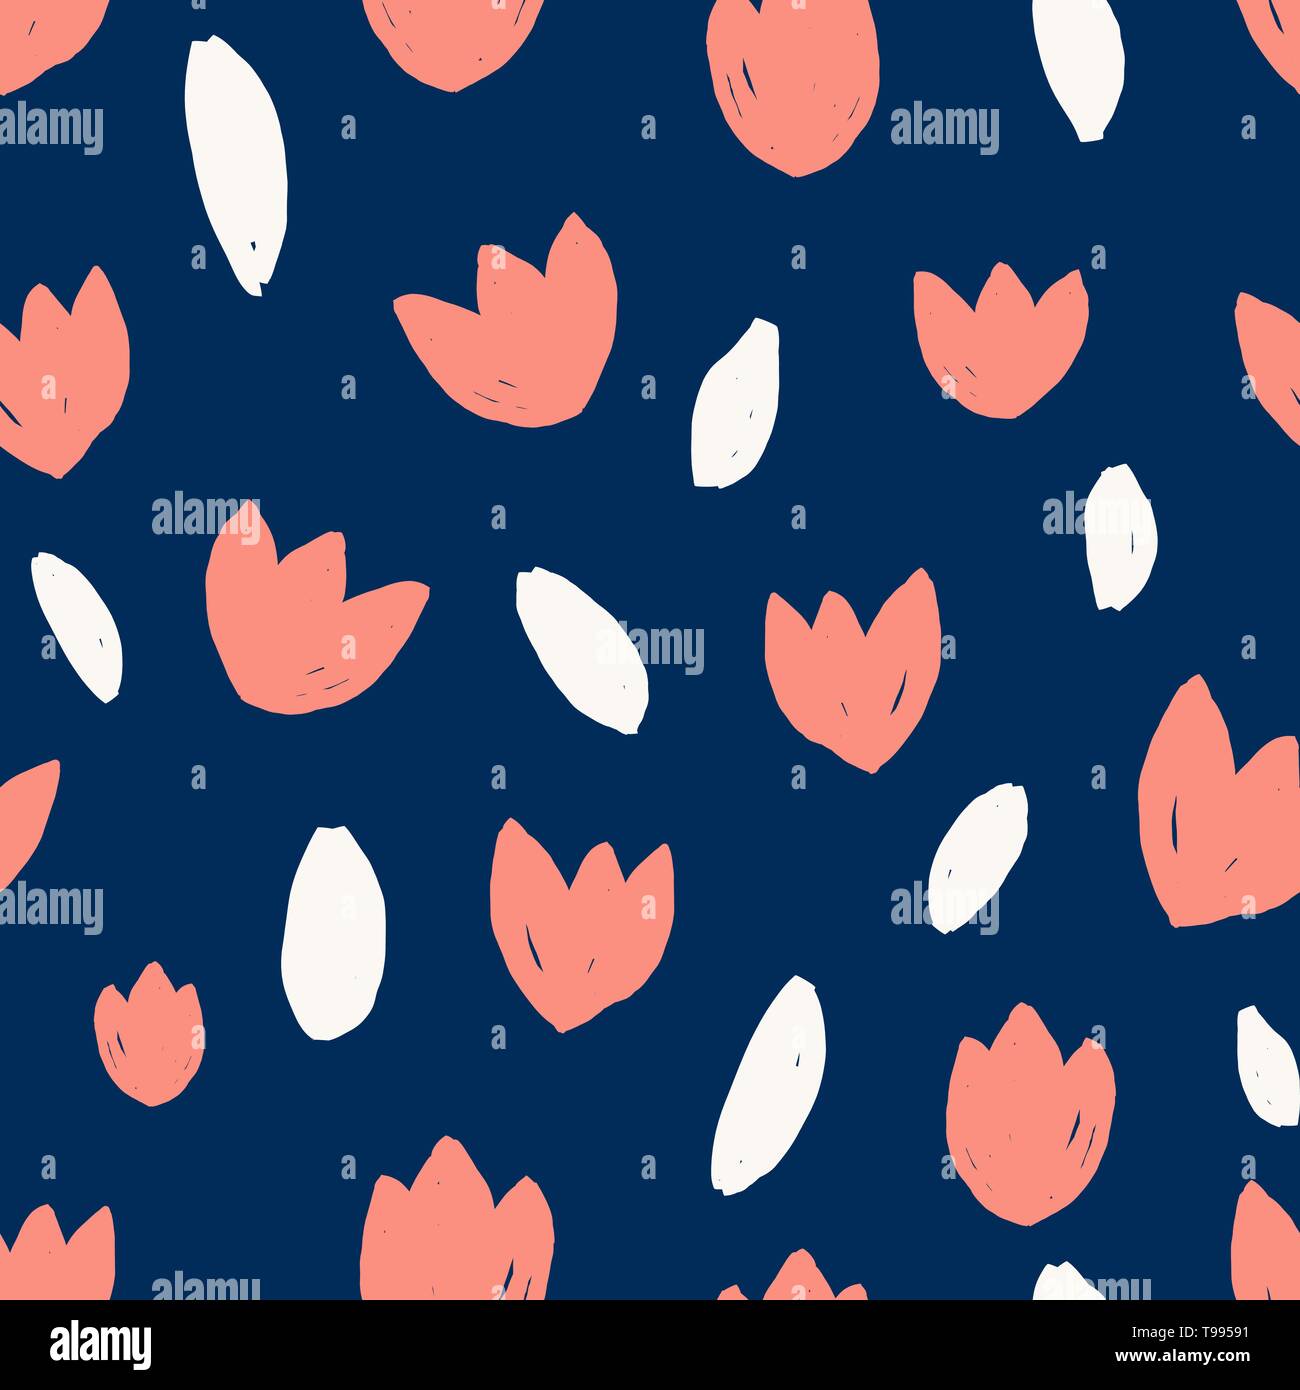 Seamless Repeating Pattern With Simple Leaf And Tulip Floral Shapes In Coral And White On Dark Blue Background Cute Colorful Floral Texture Fabric W Stock Vector Image Art Alamy